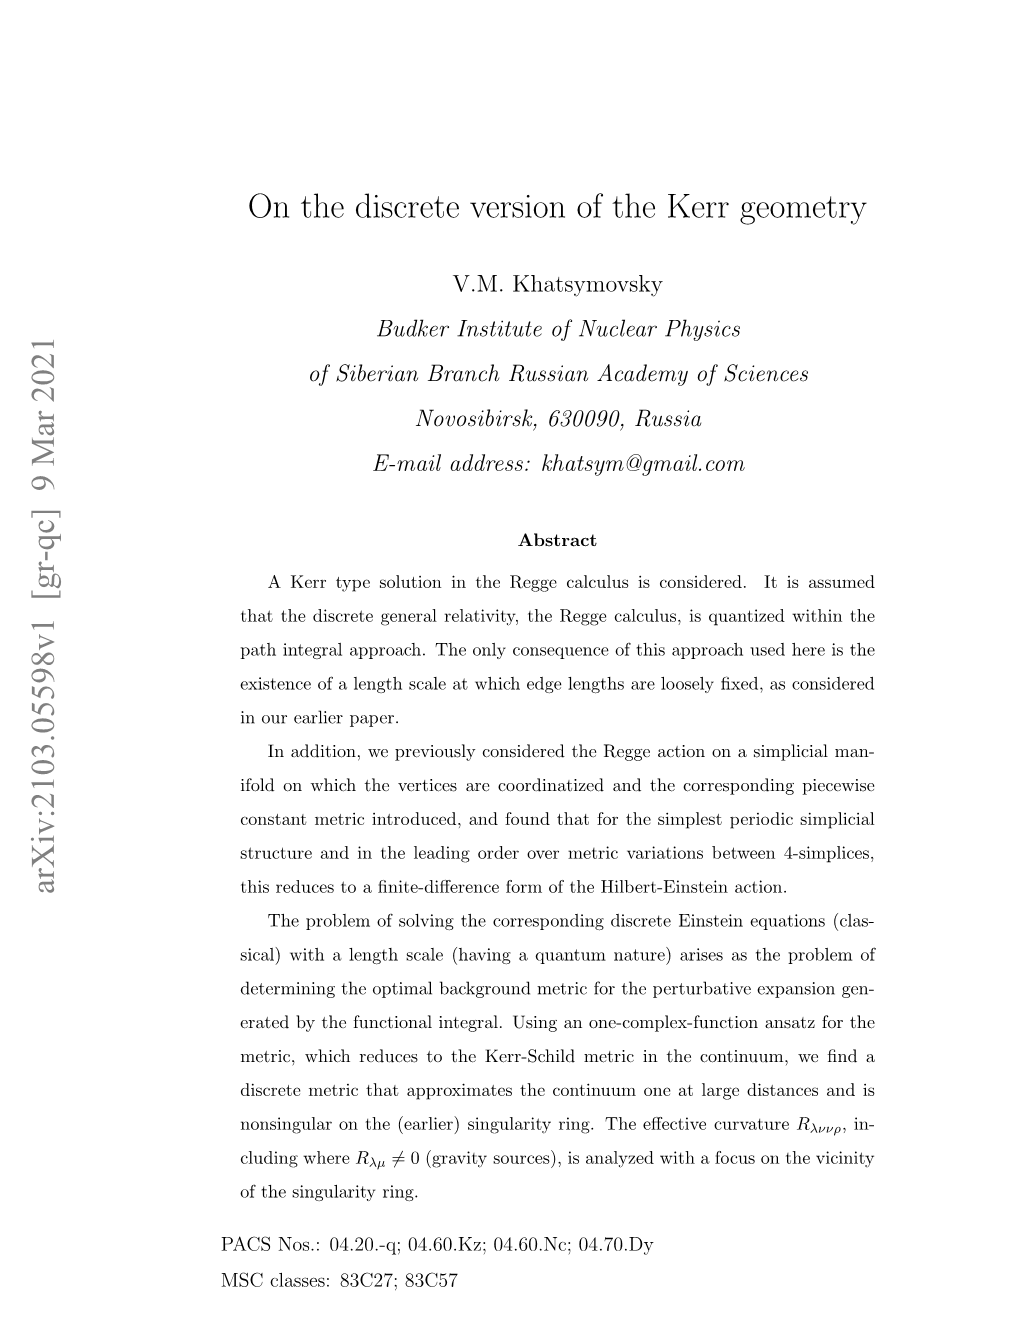 On the Discrete Version of the Kerr Geometry